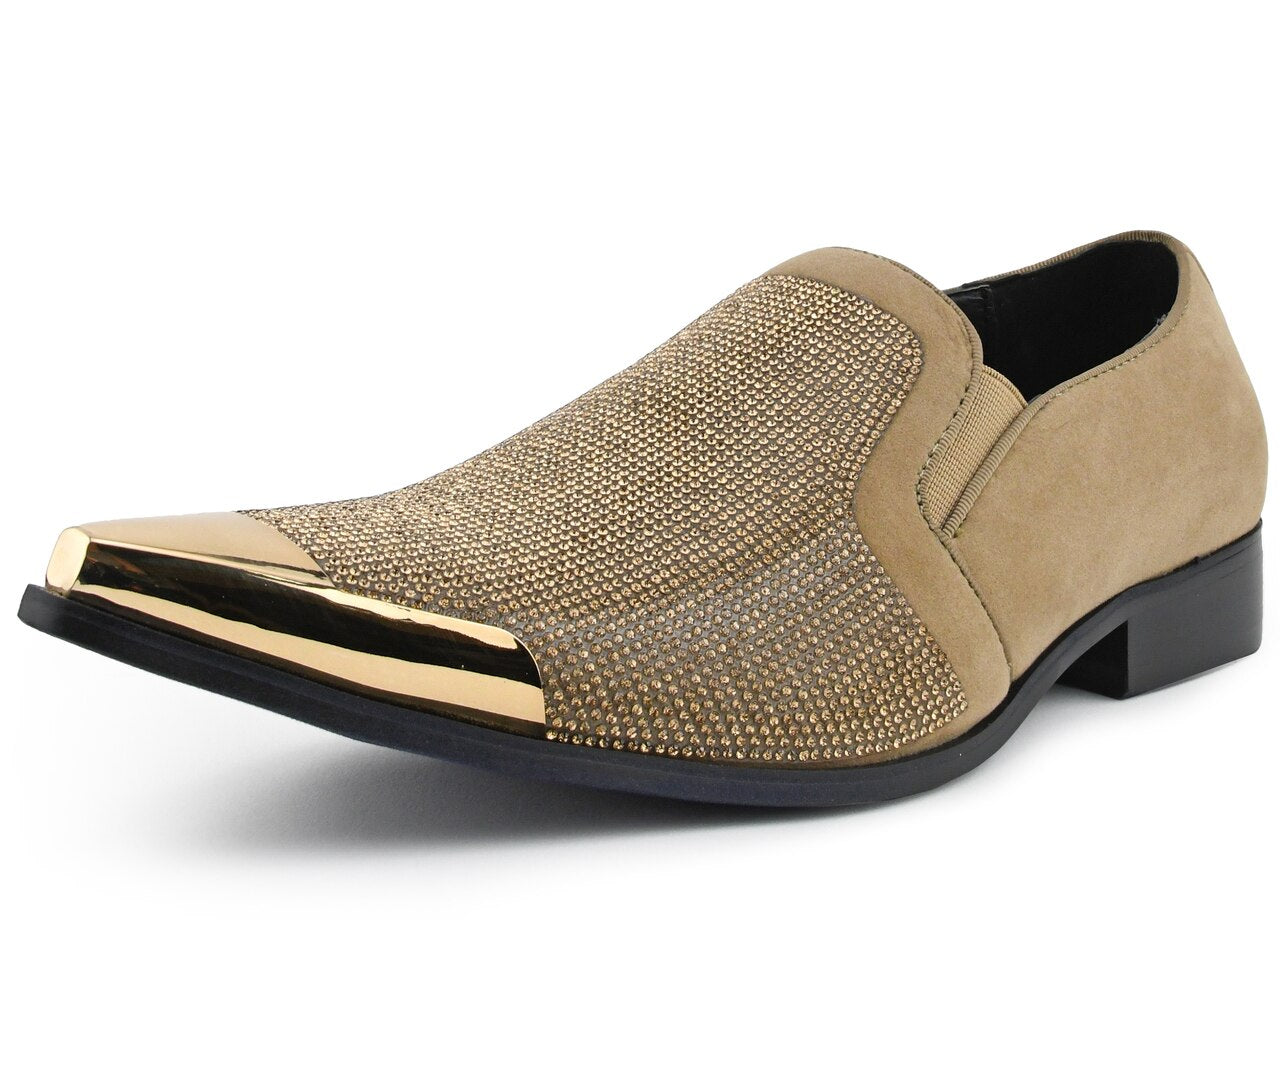 Men Dress Shoes-Dezzy-taupe - Church Suits For Less